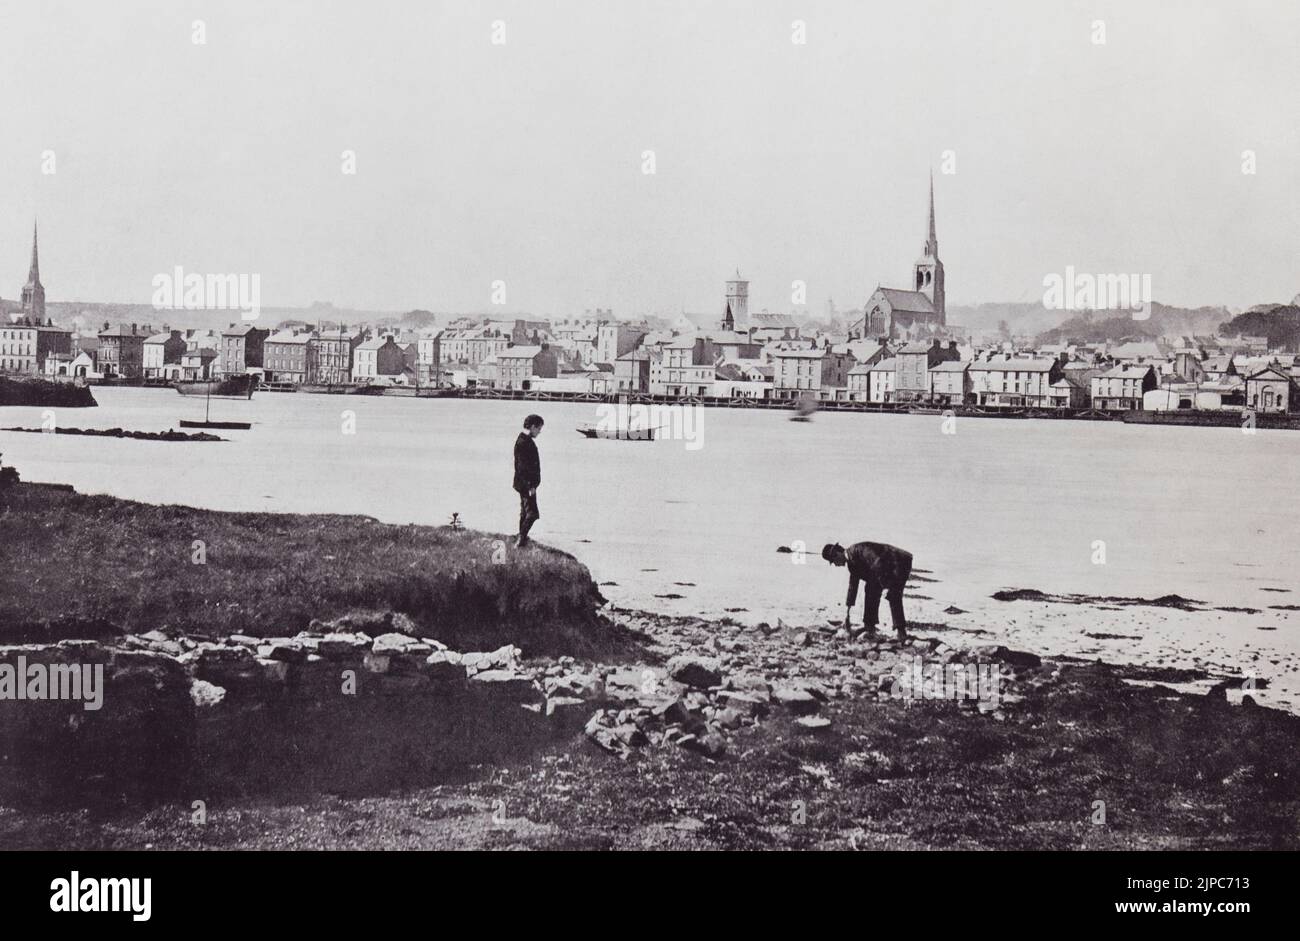 Wexford, County Wexford, Ireland, seen here from the opposite shore in the 19th century.  From Around The Coast,  An Album of Pictures from Photographs of the Chief Seaside Places of Interest in Great Britain and Ireland published London, 1895, by George Newnes Limited. Stock Photo